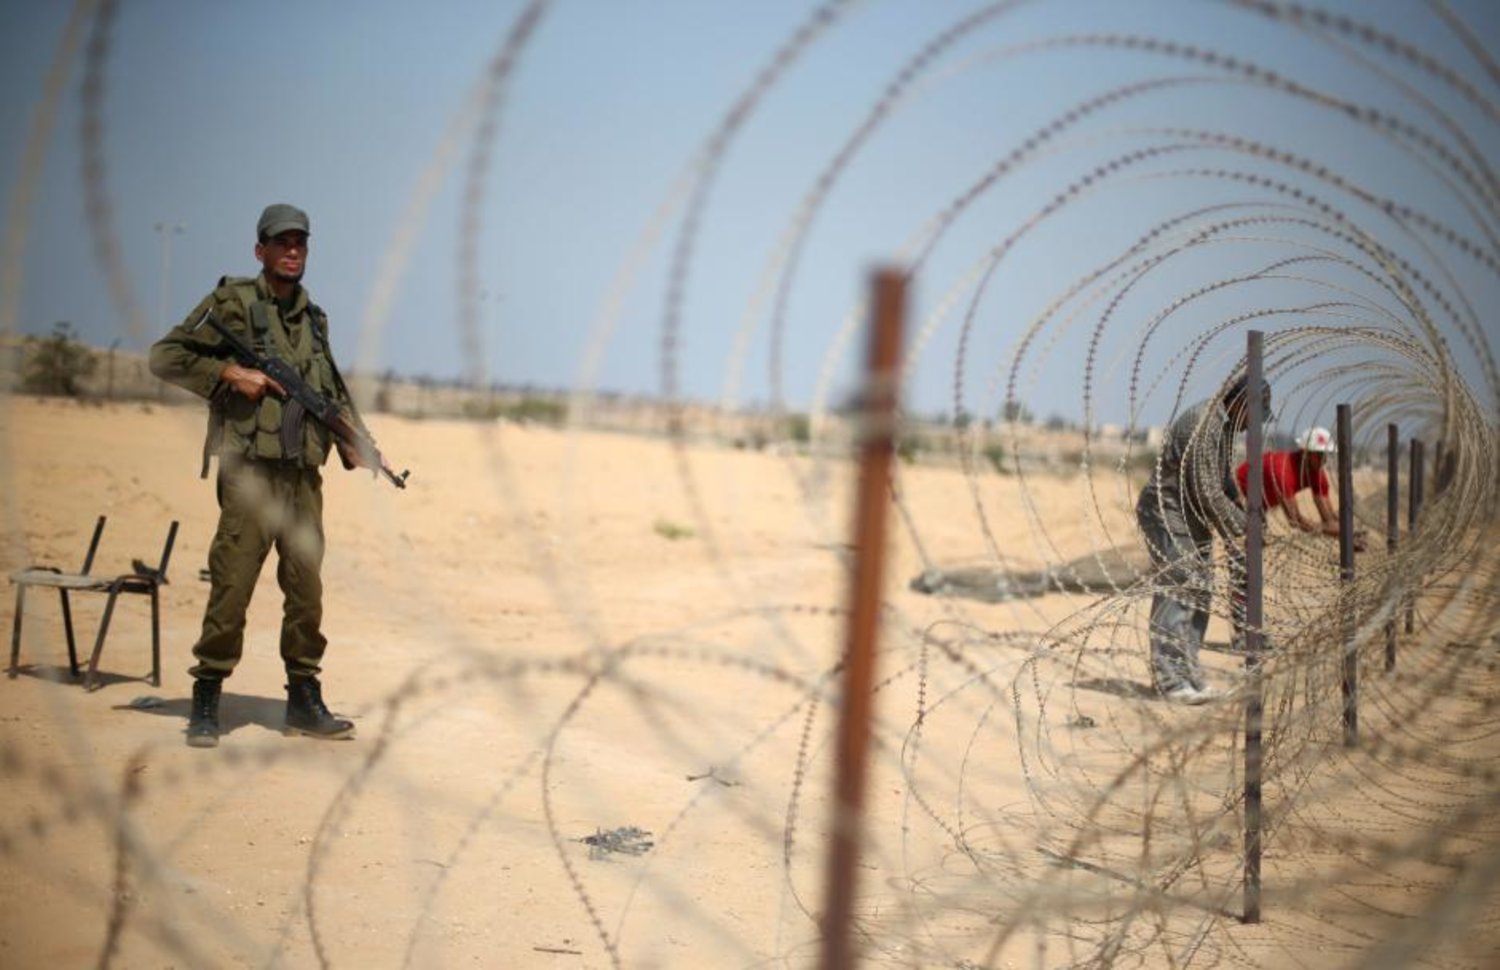 A member of the Palestinian security forces, loyal to Hamas, stands guard as men set up a barbed wire on the border with Egypt, in Rafah in the southern Gaza Strip, August 24, 2017. REUTERS/Ibraheem Abu Mustafa/File Photo